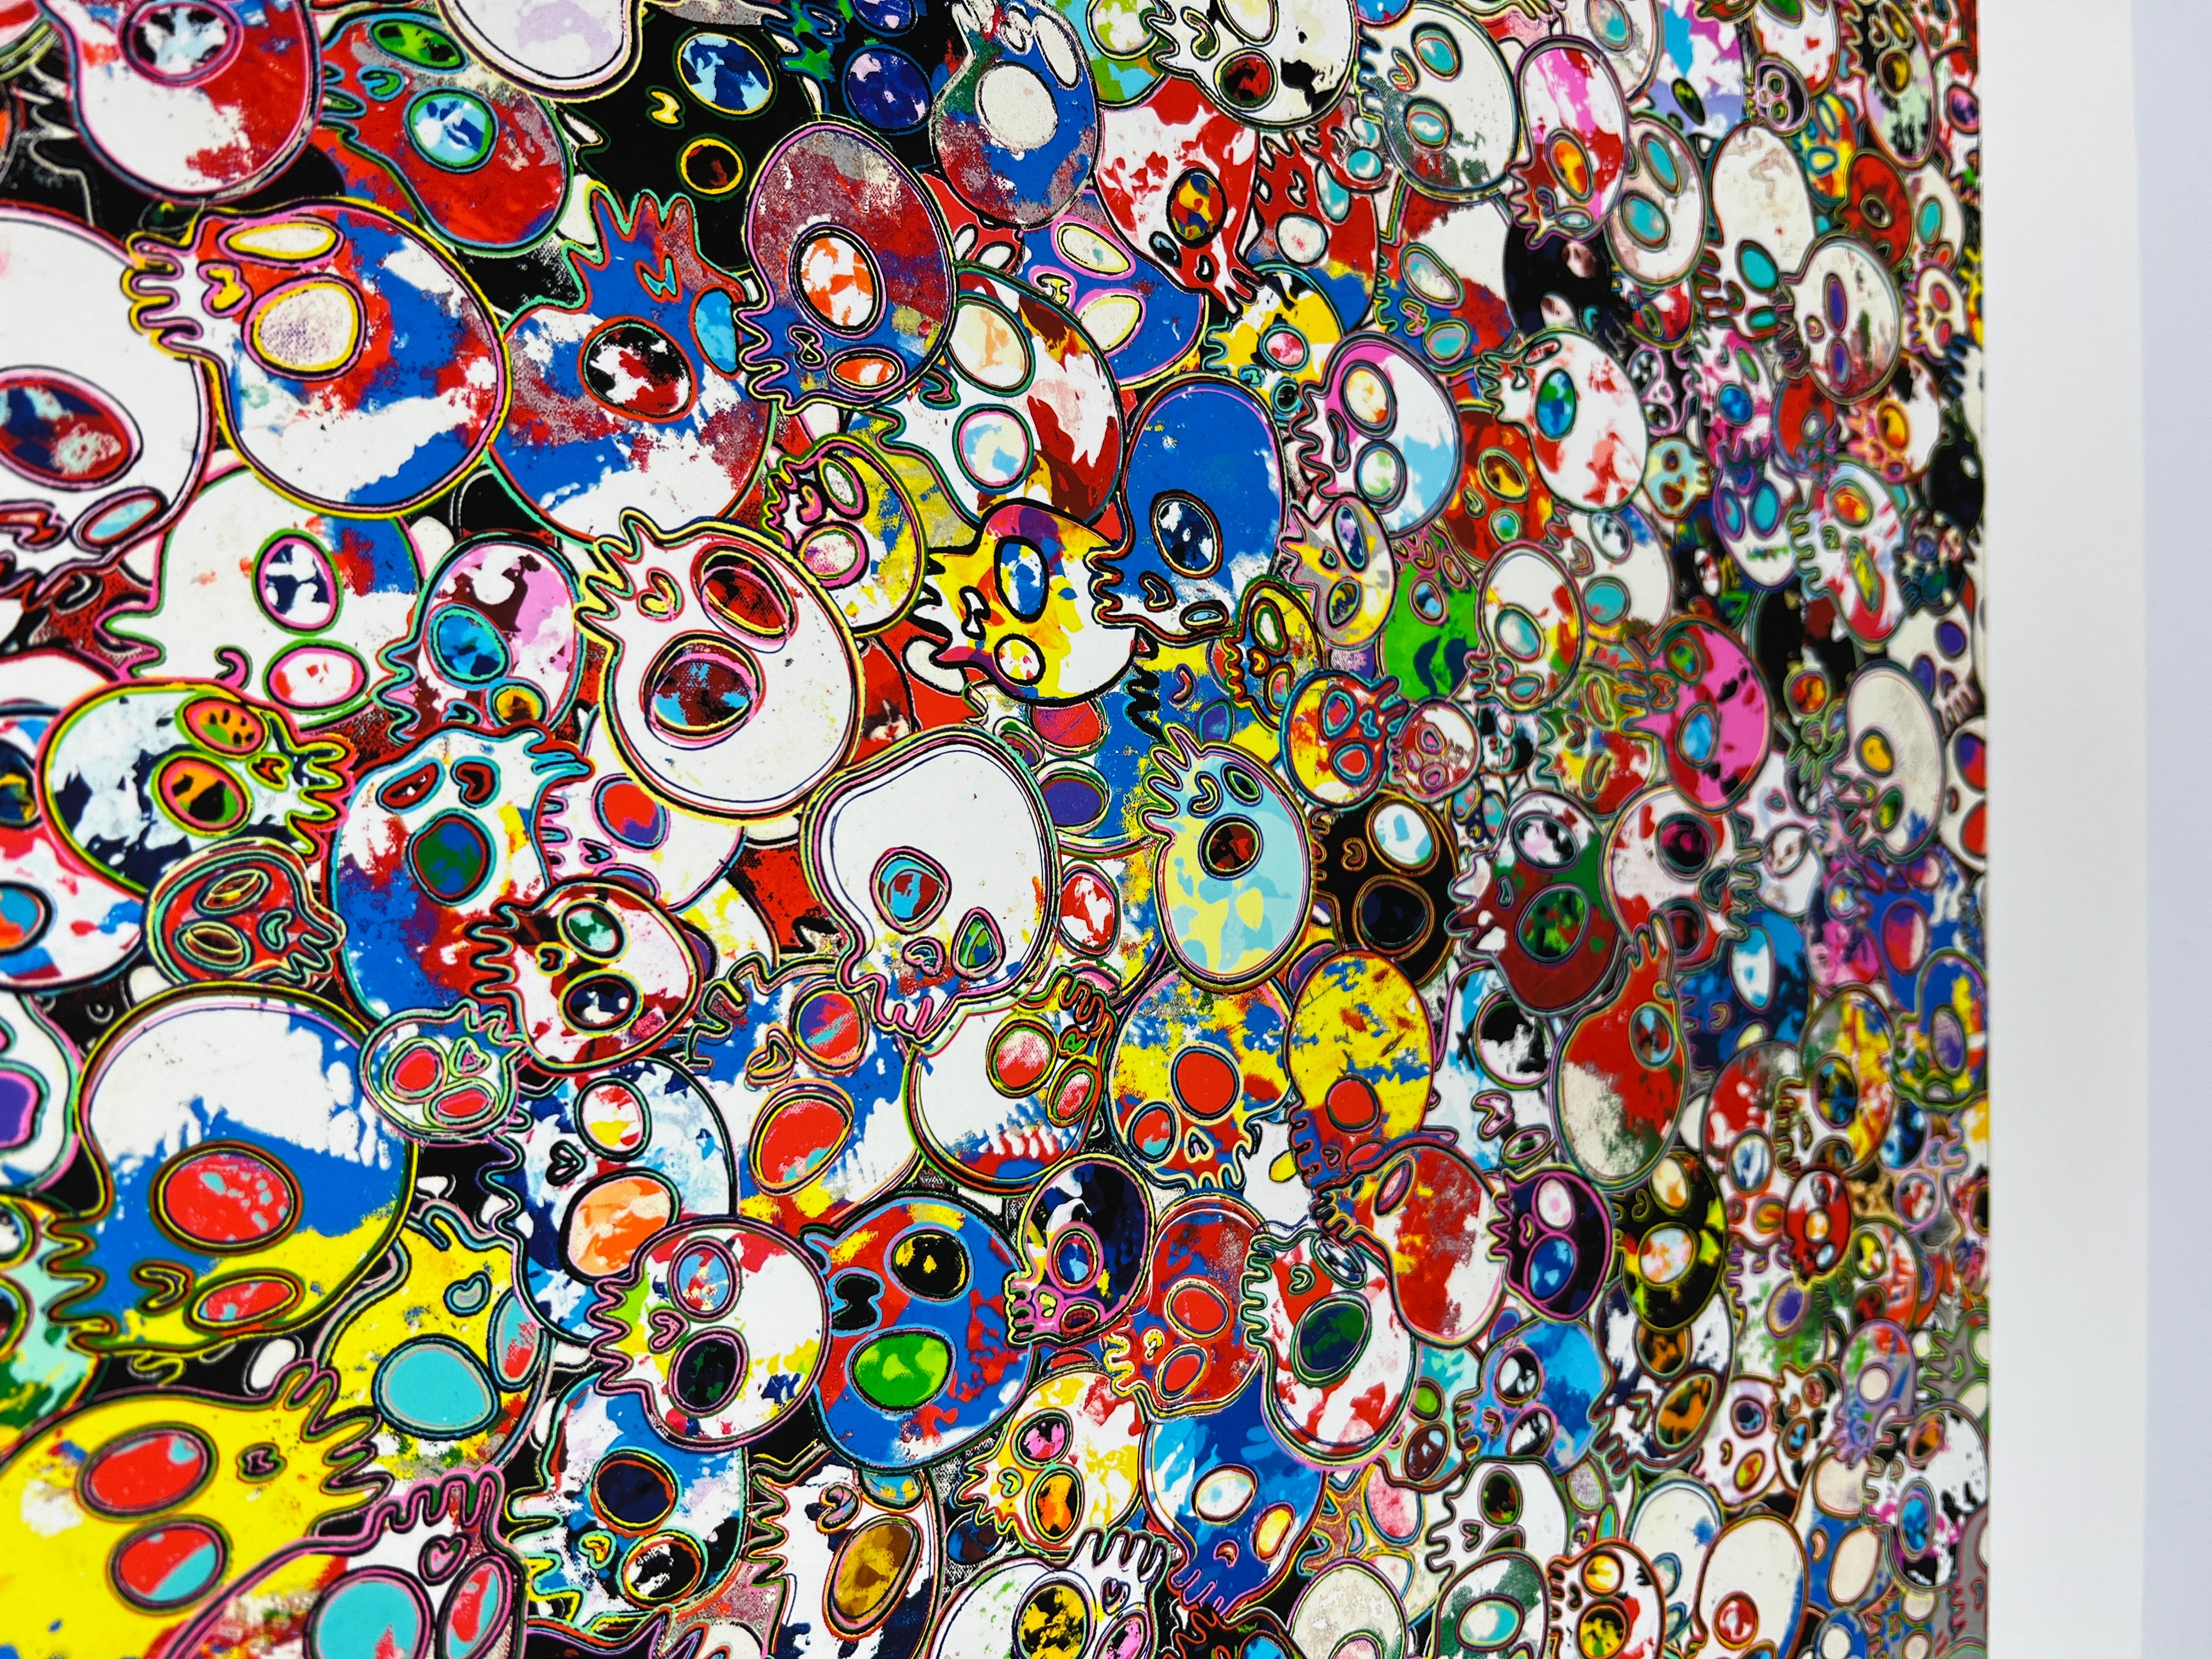 Artist: Takashi Murakami
Title: A Fork in the Road
Year: 2022
Edition: 100
Size: Image size ： 568×482mm / Sheet size ： 700×600mm
Medium: Archival Pigment Print on Canson Velin, Cotton Rag Paper with deckled edges

This is hand signed by Takashi